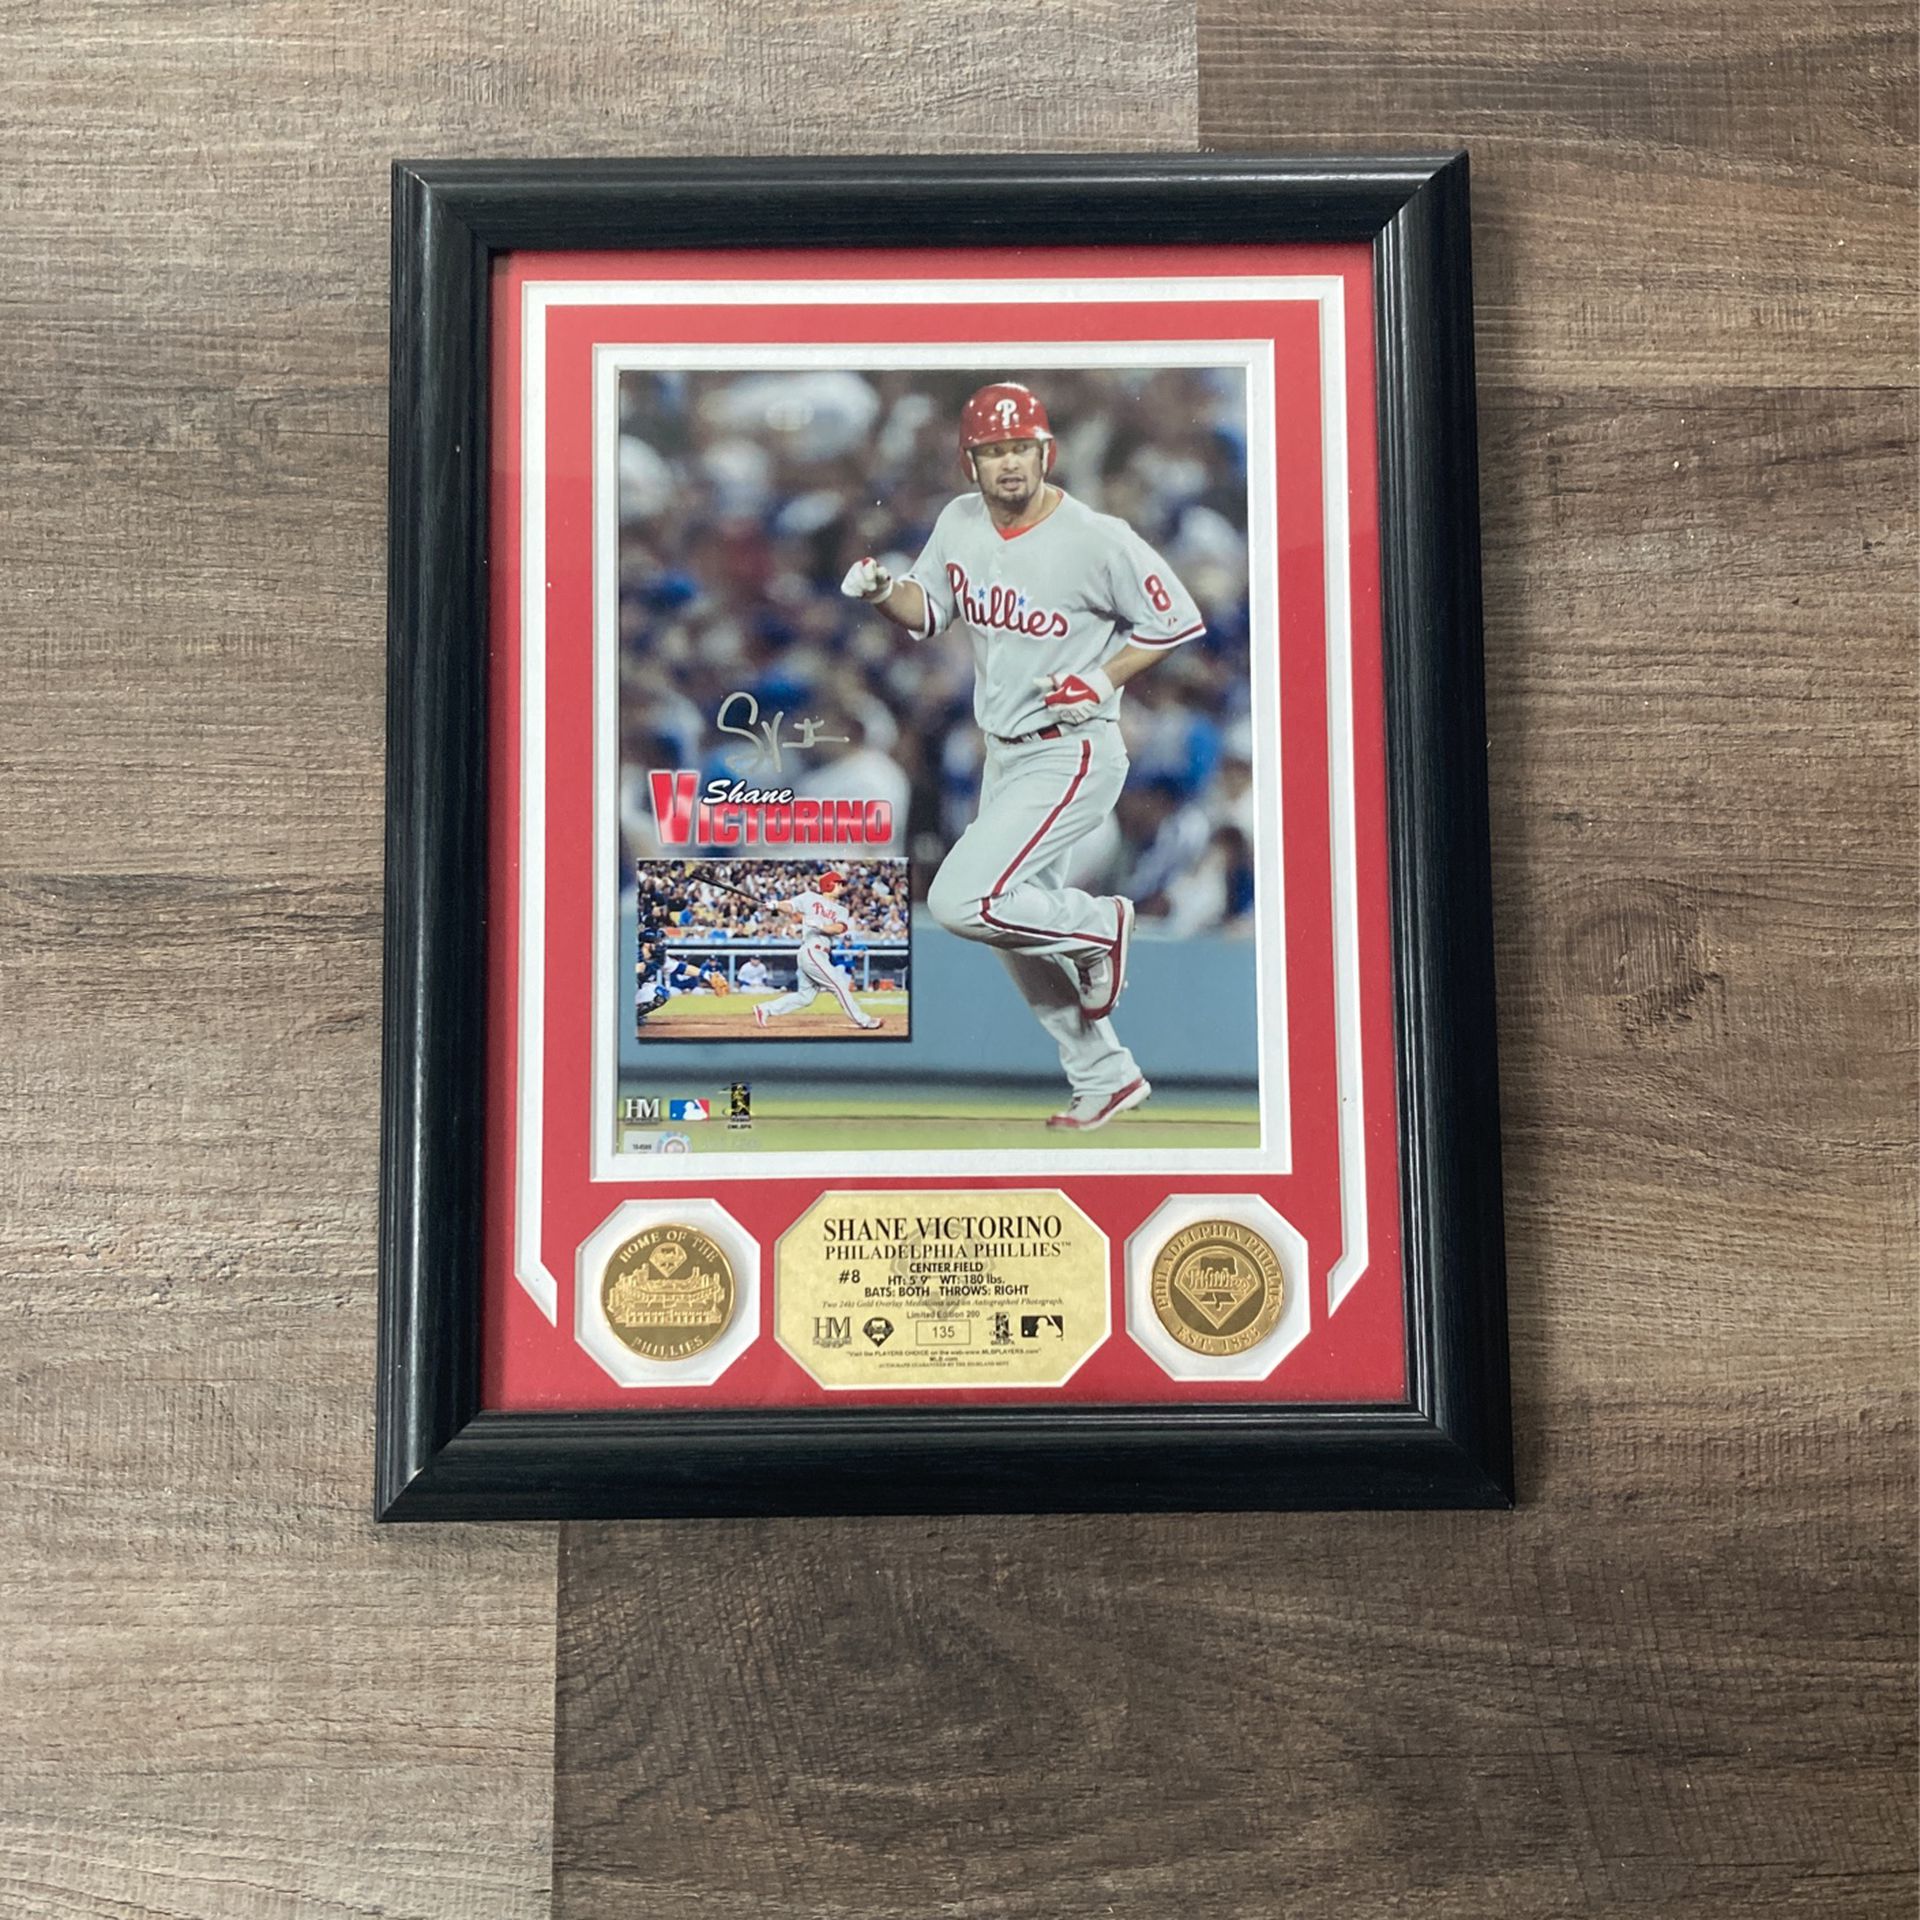 Shane Victorino Framed Autographed Photo Limited Edition Numbered 135/200  w/ 24kt Gold Overlay Medallions & COA Philadelphia Phillies for Sale in  Port